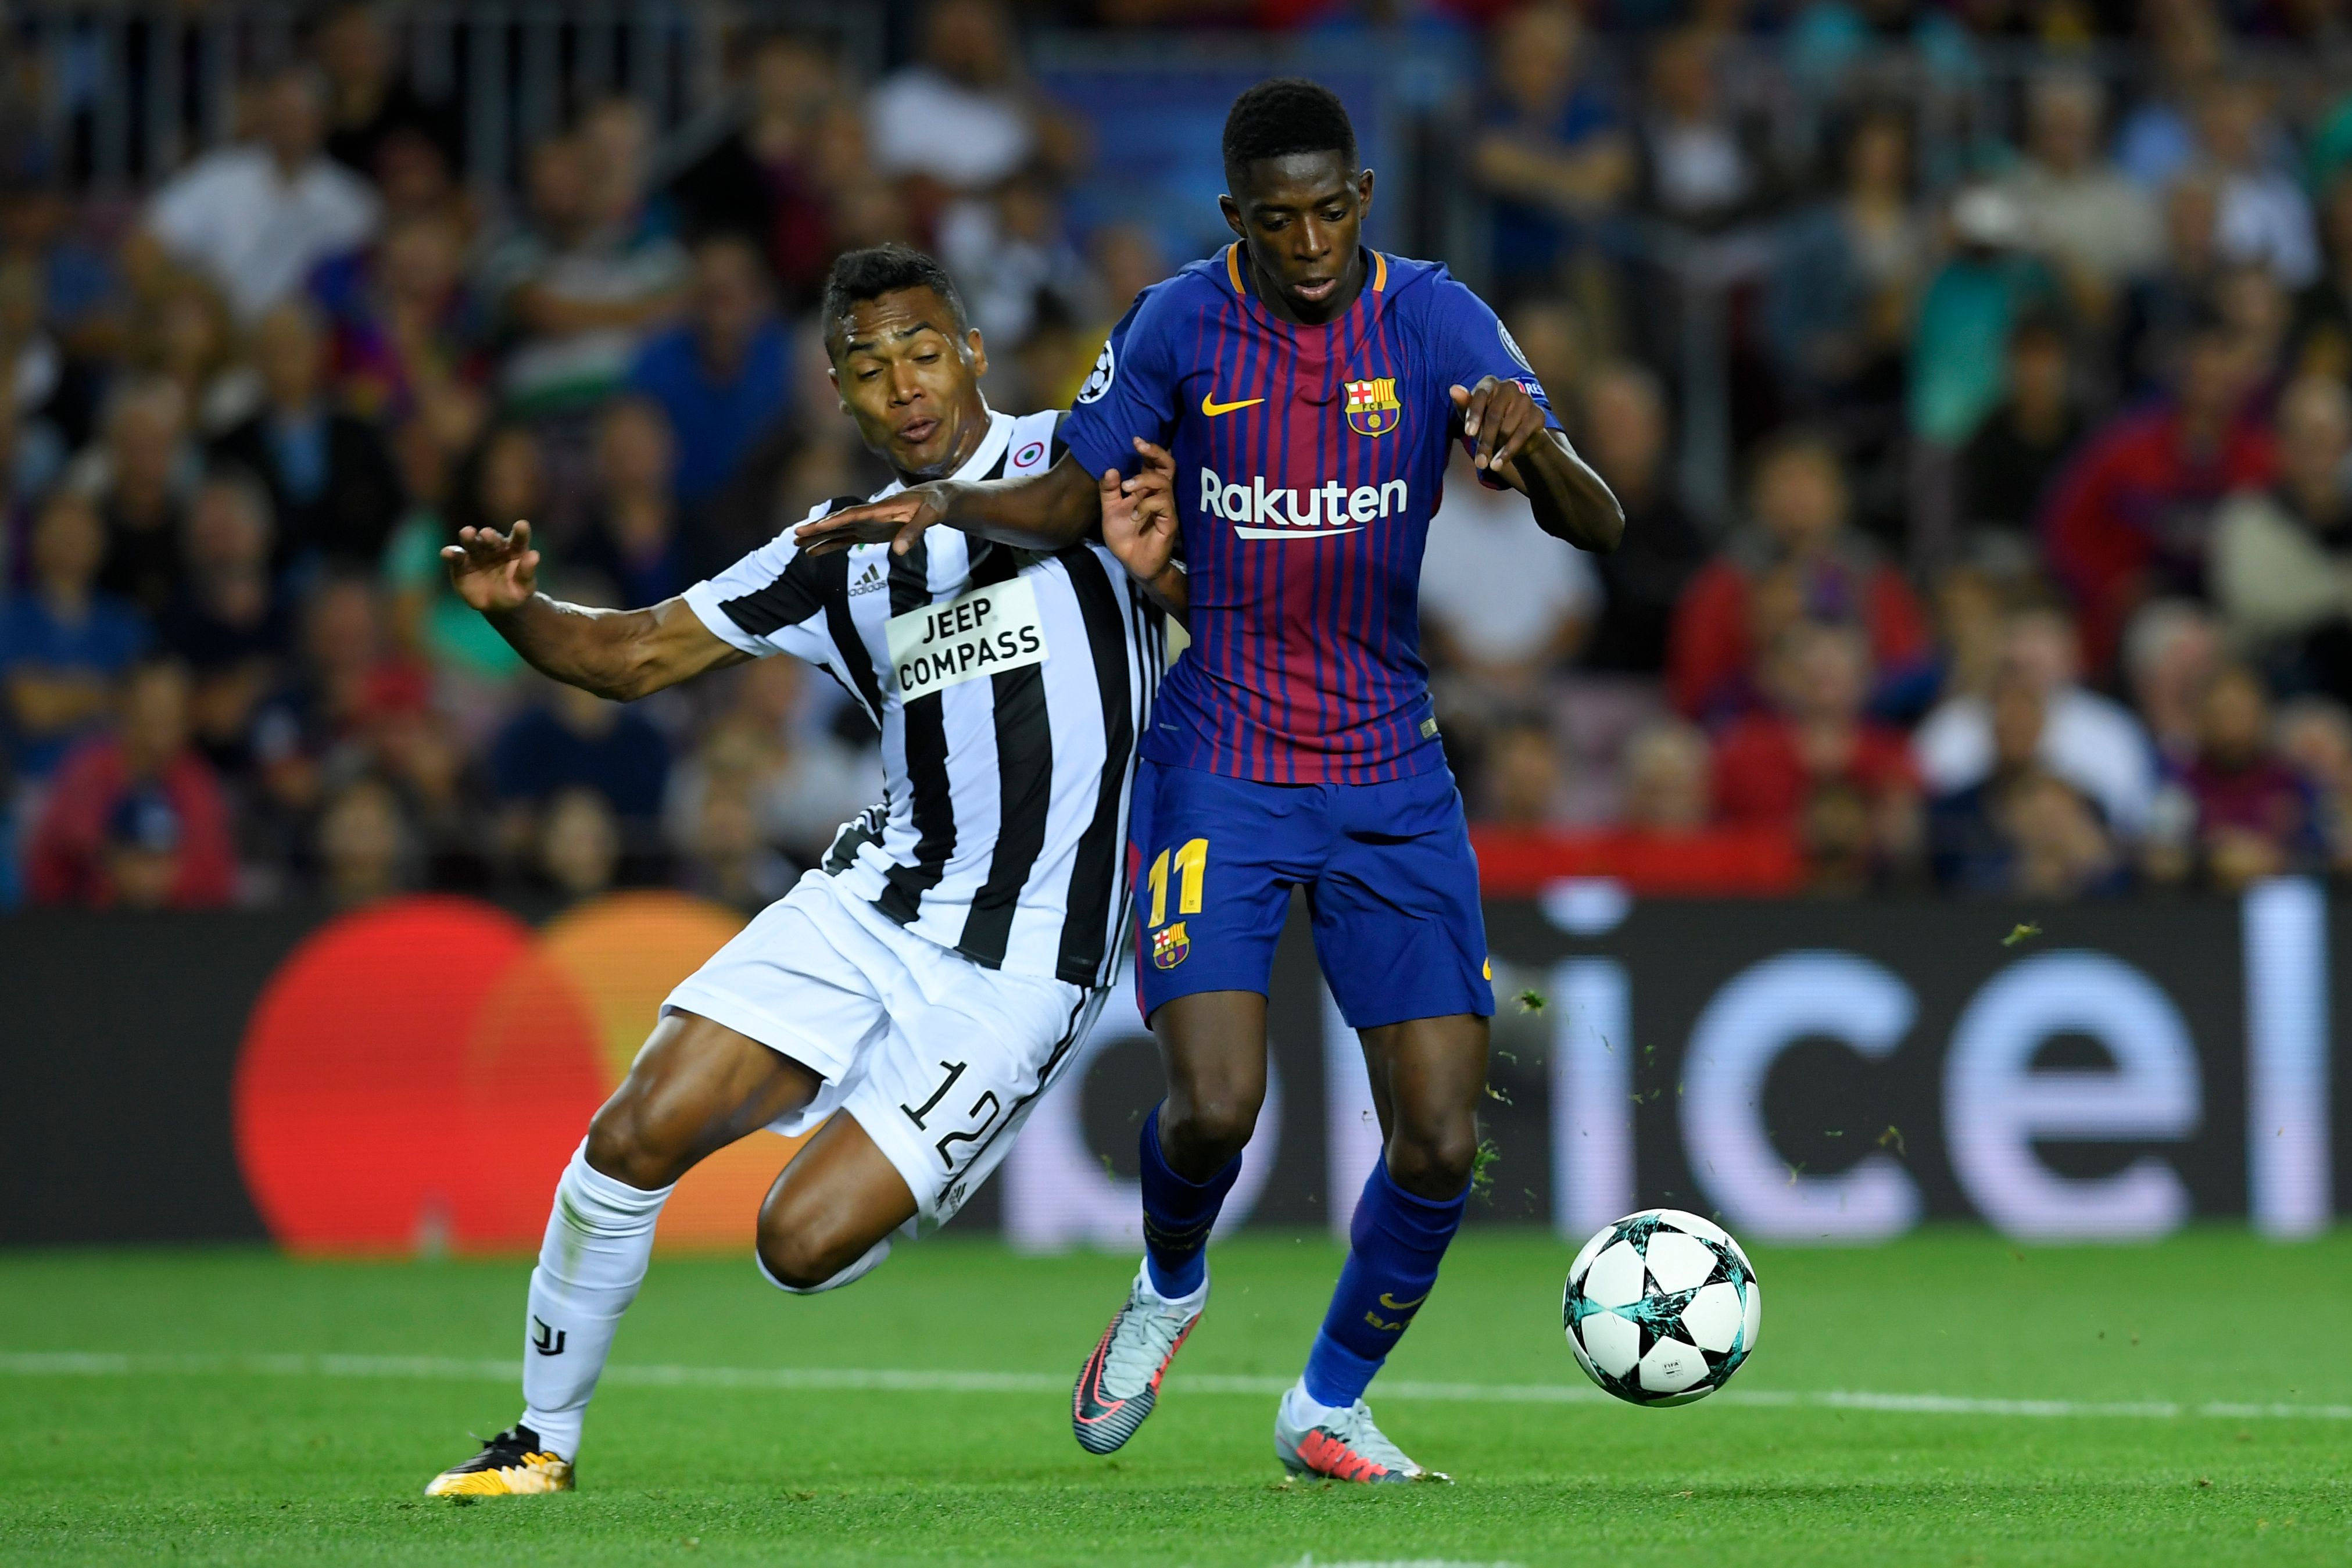 Juventus' defender from Brazil Alex Sandro (L) vies with Barcelona's forward from France Ousmane Dembele during the UEFA Champions League Group D football match FC Barcelona vs Juventus at the Camp Nou stadium in Barcelona on September 12, 2017. / AFP PHOTO / LLUIS GENE        (Photo credit should read LLUIS GENE/AFP/Getty Images)